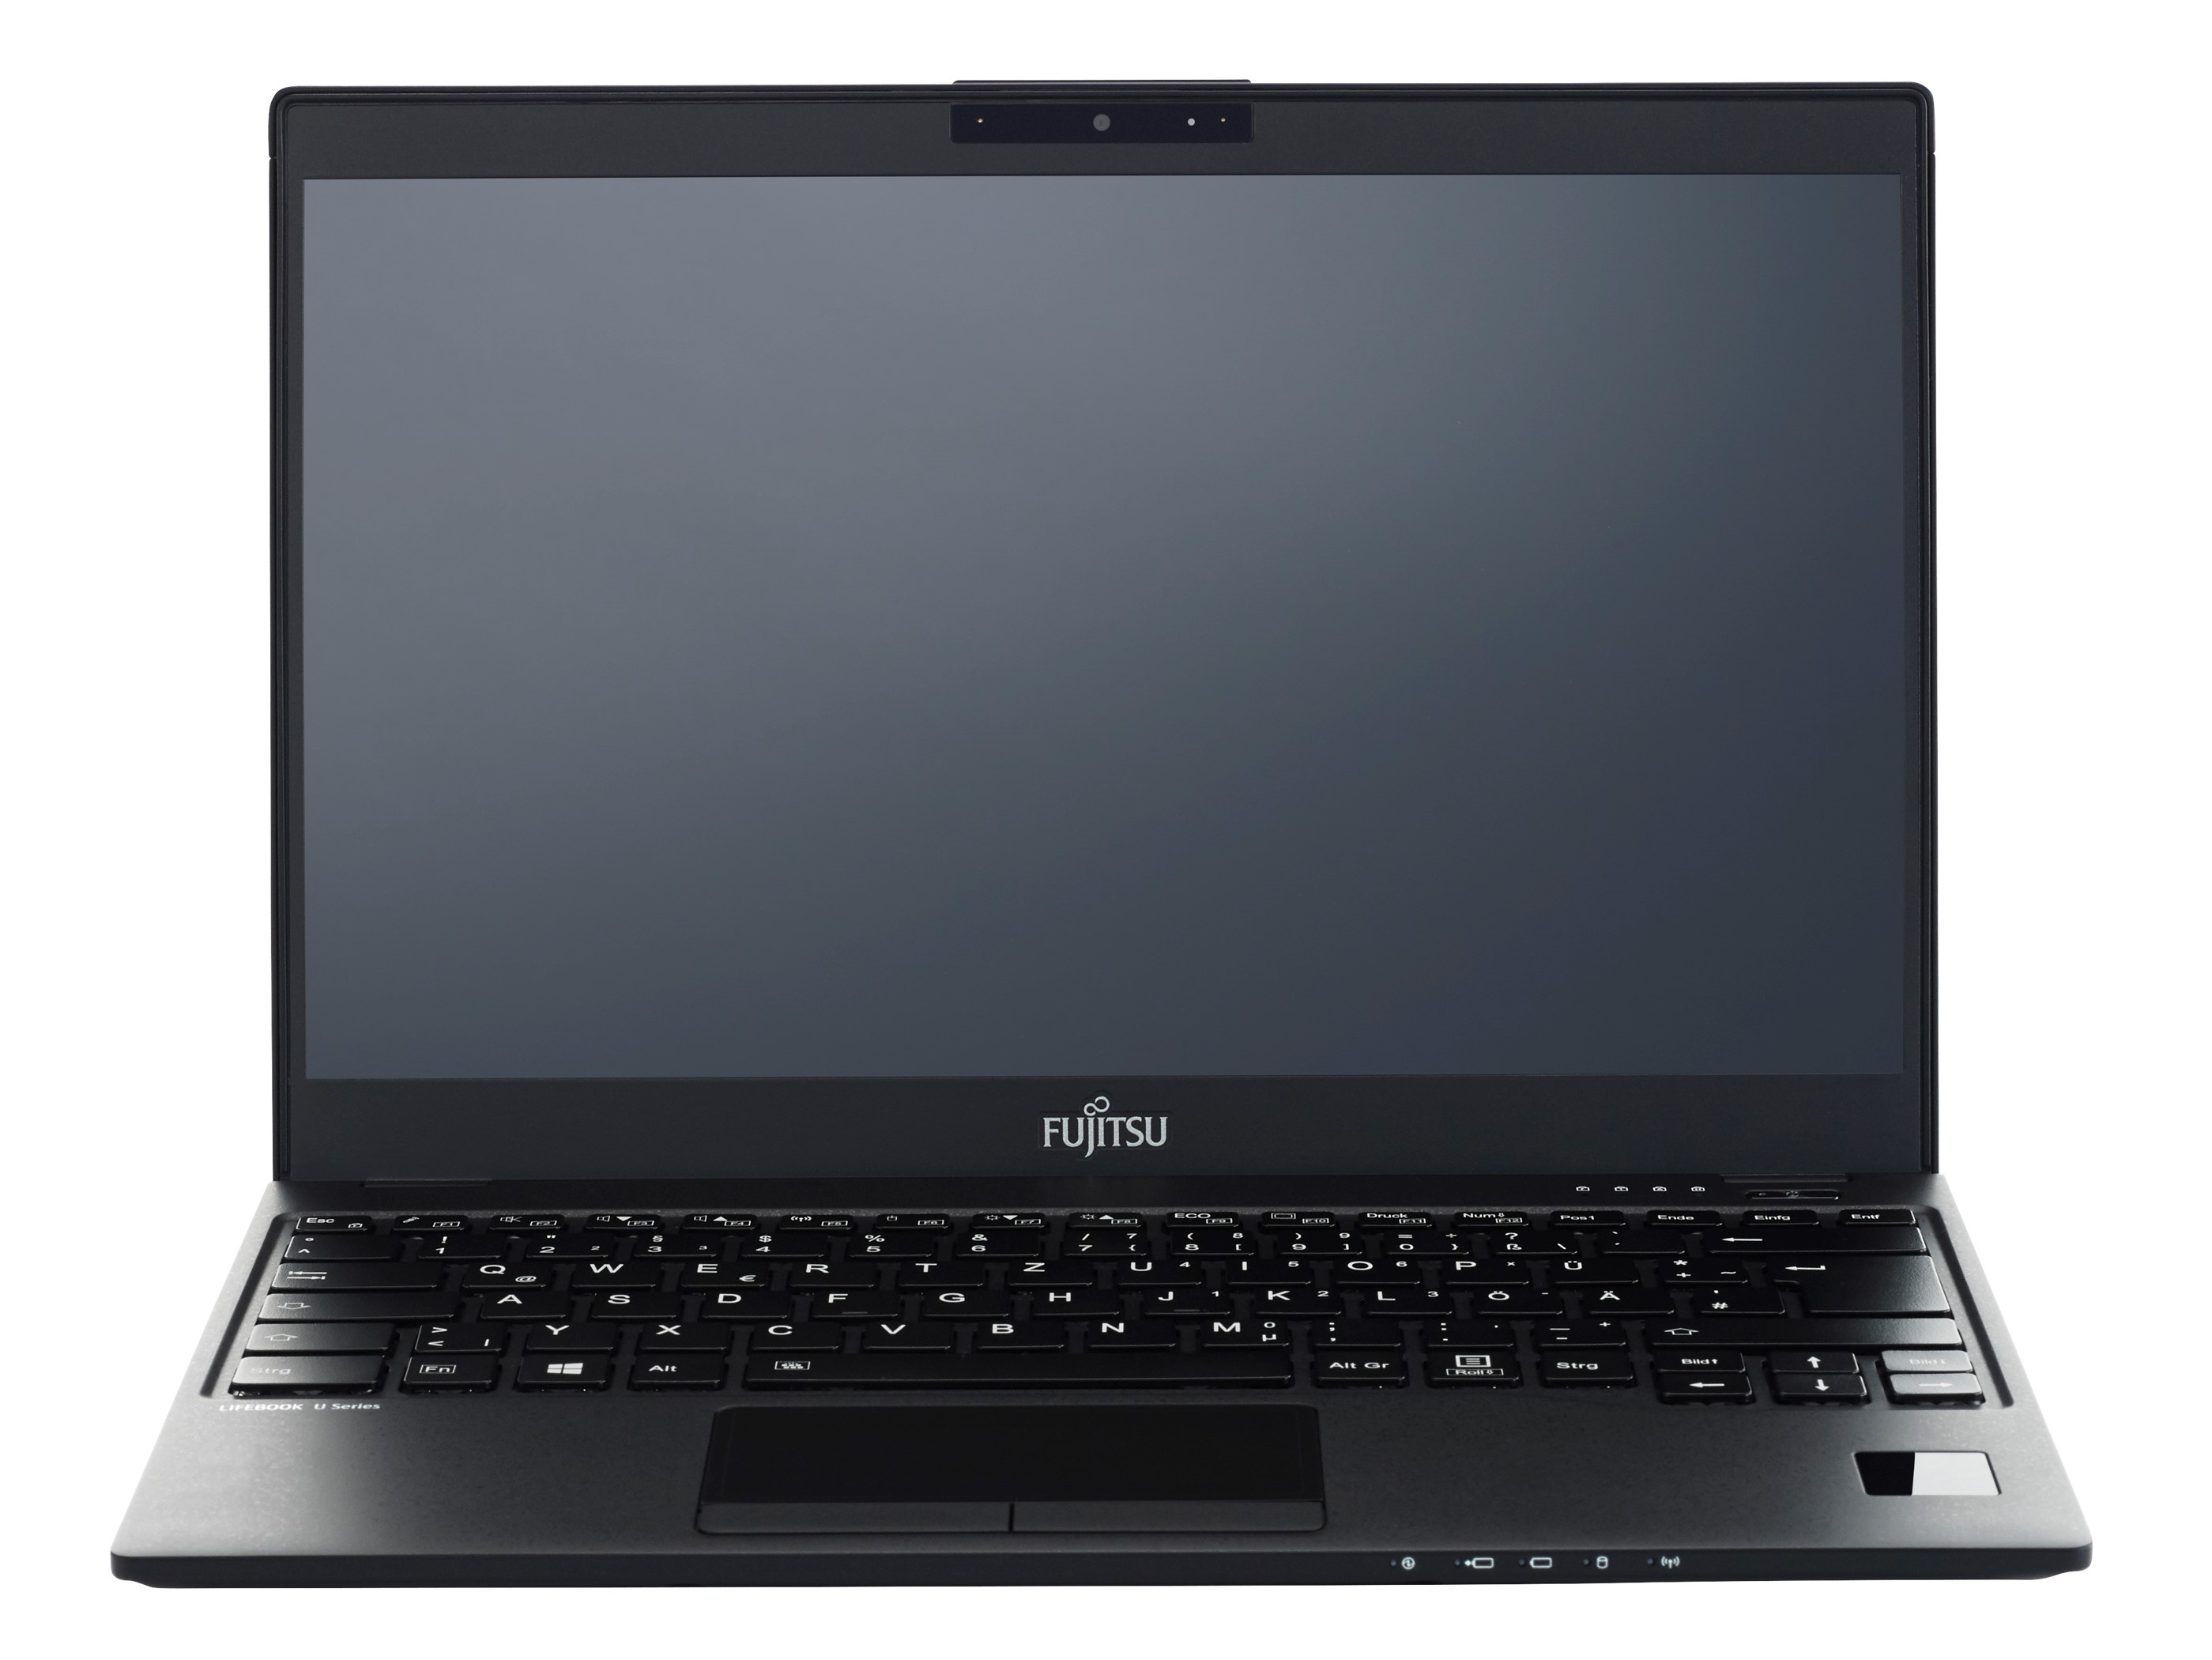 Fujitsu Lifebook U939 Laptop Review: A compact business notebook with